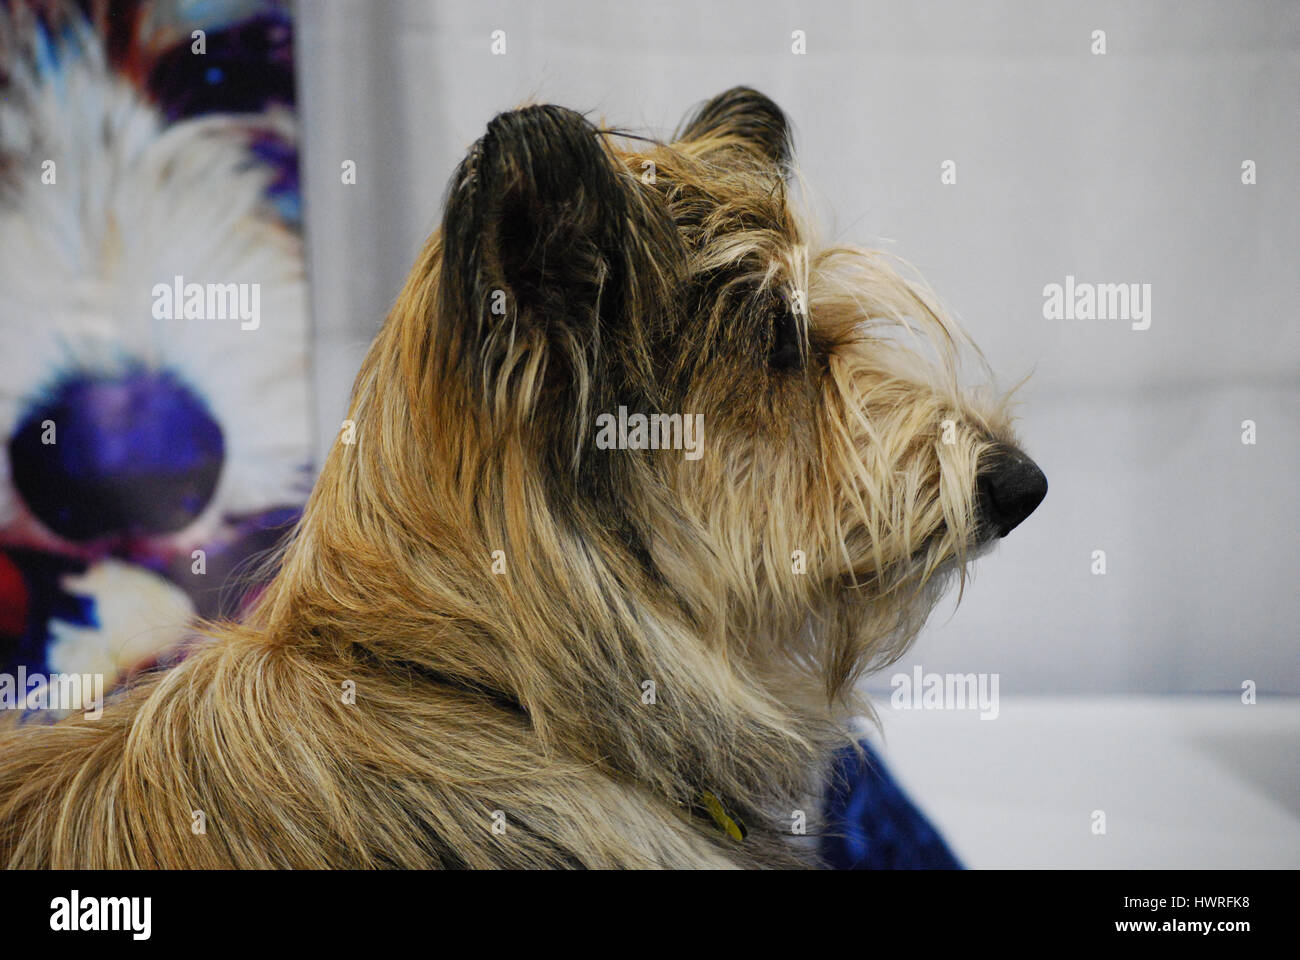 Very shaggy berger picard dog profile. Stock Photo